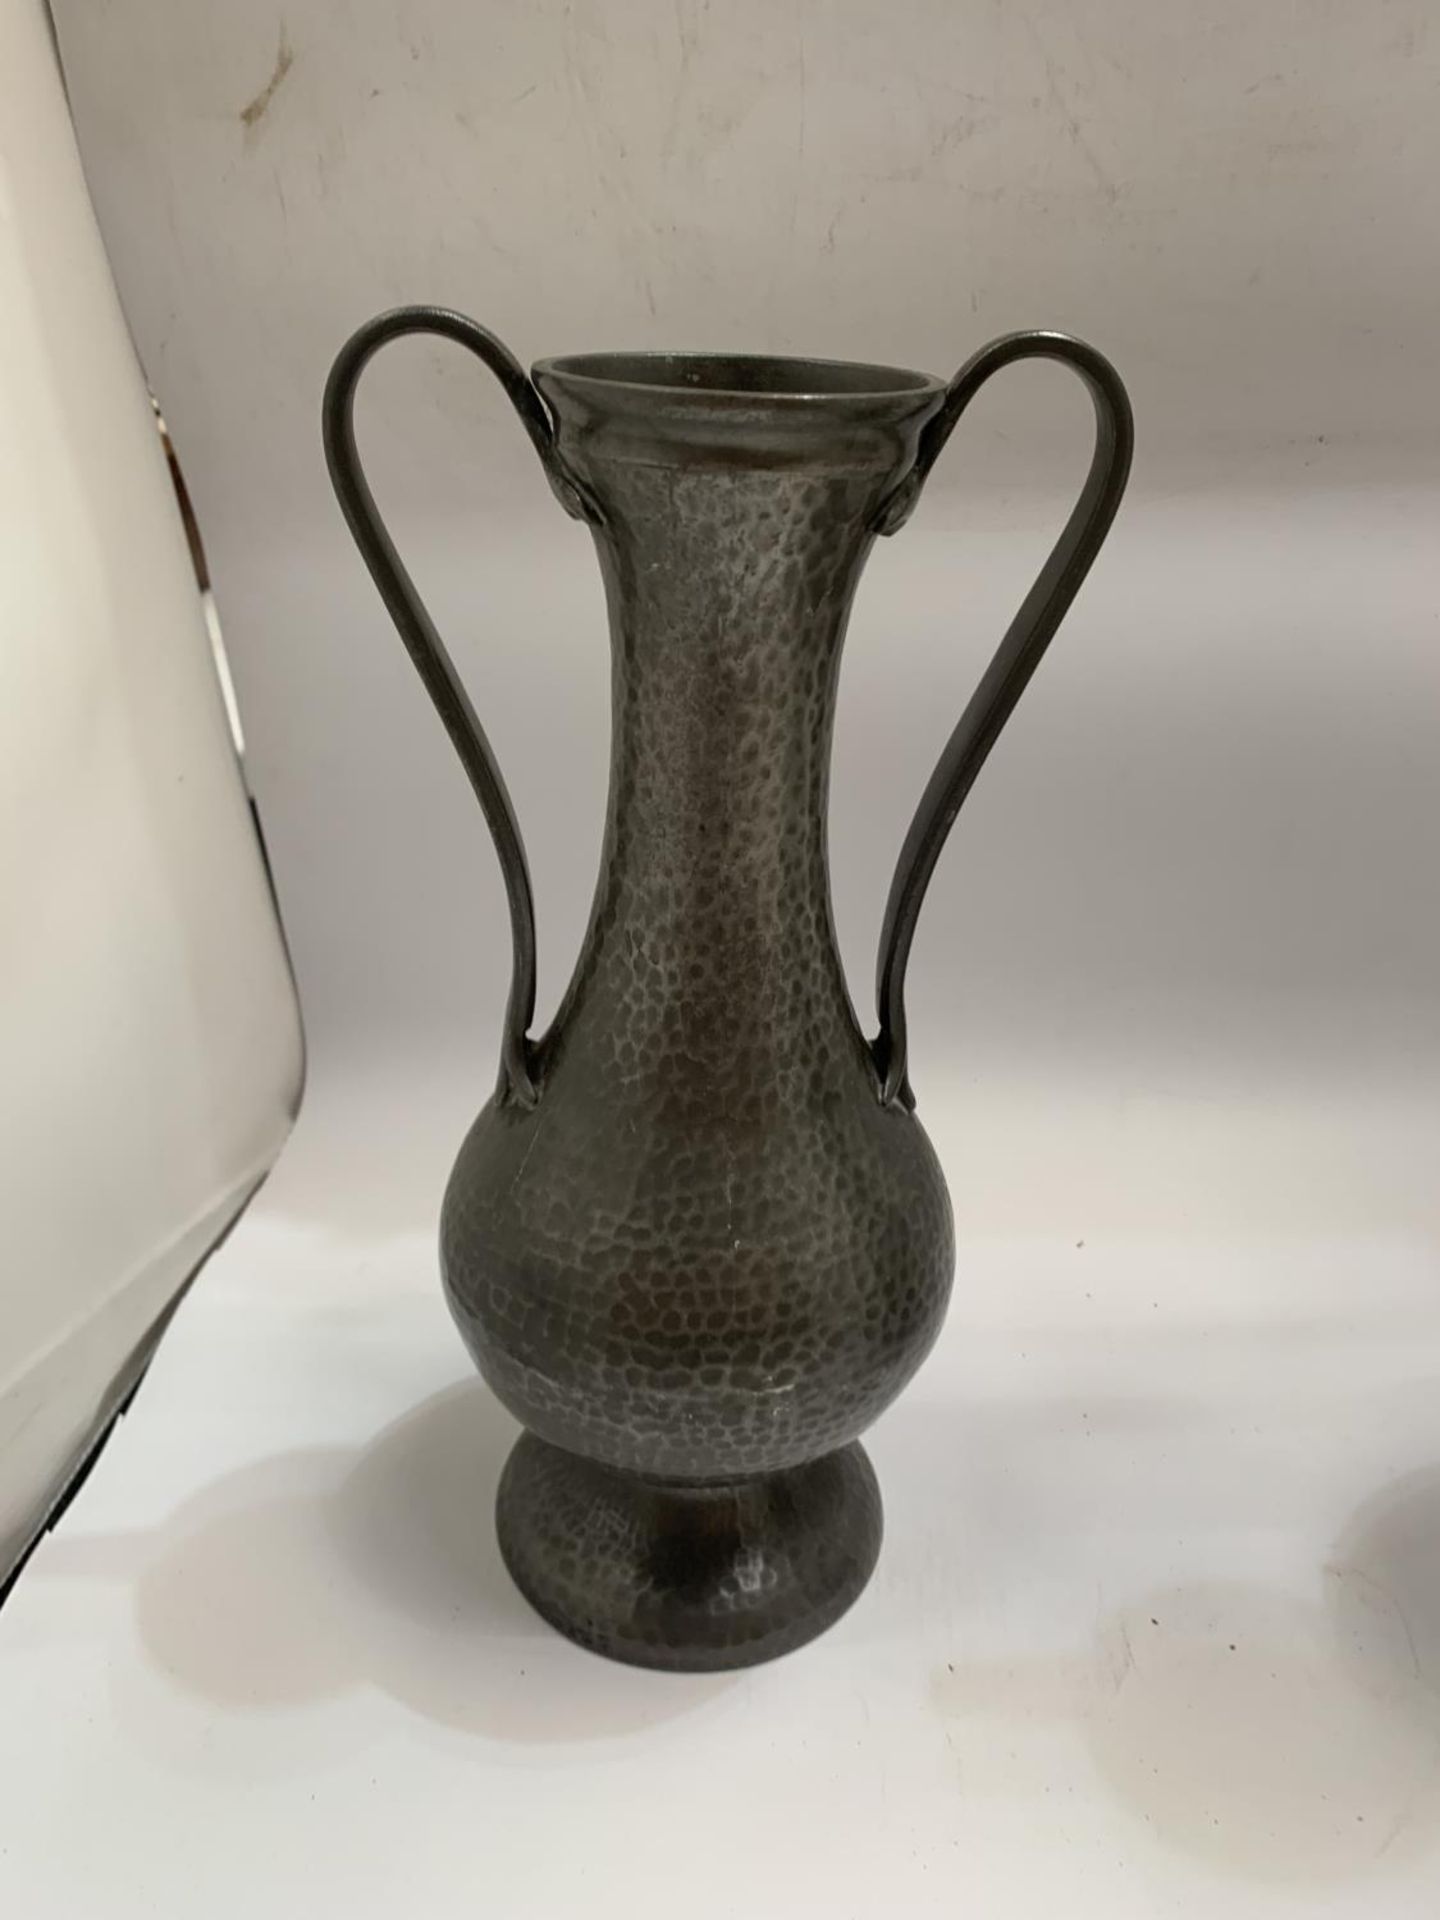 A PAIR OF ARTS AND CRAFTS STYLE TWIN HANDLED PEWTER VASES - Image 2 of 3